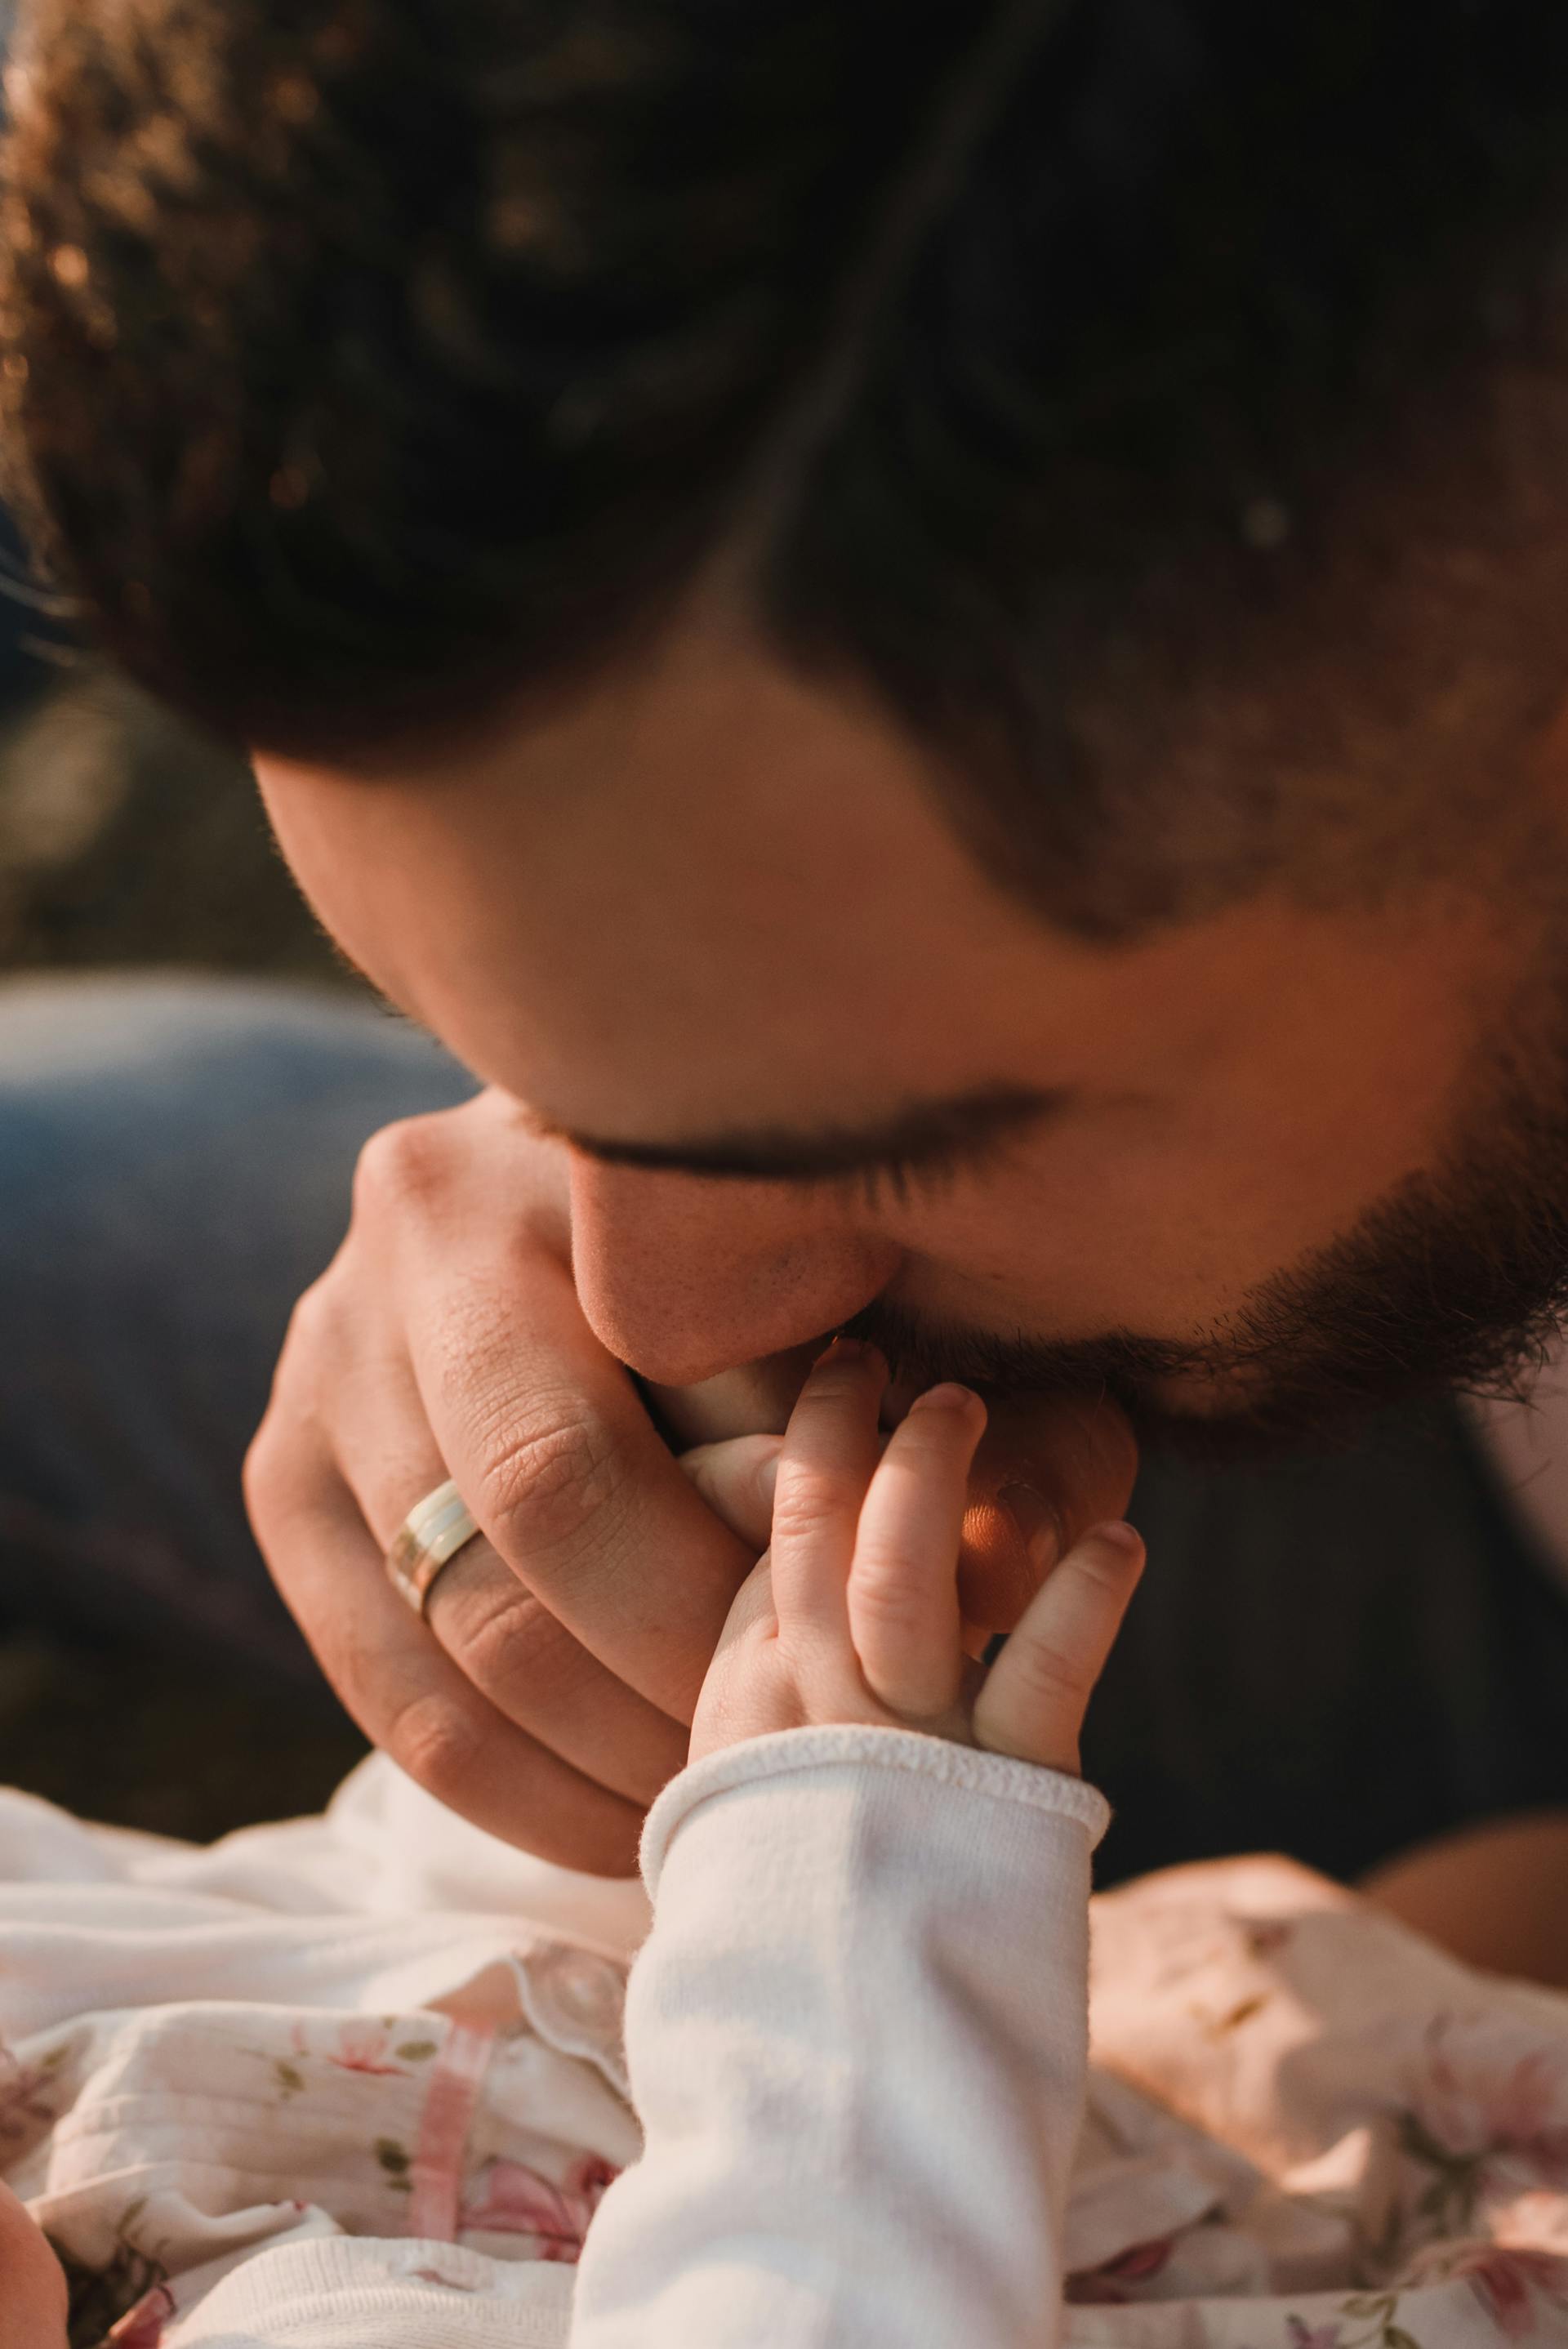 A man kissing a baby's hand | Source: Pexels